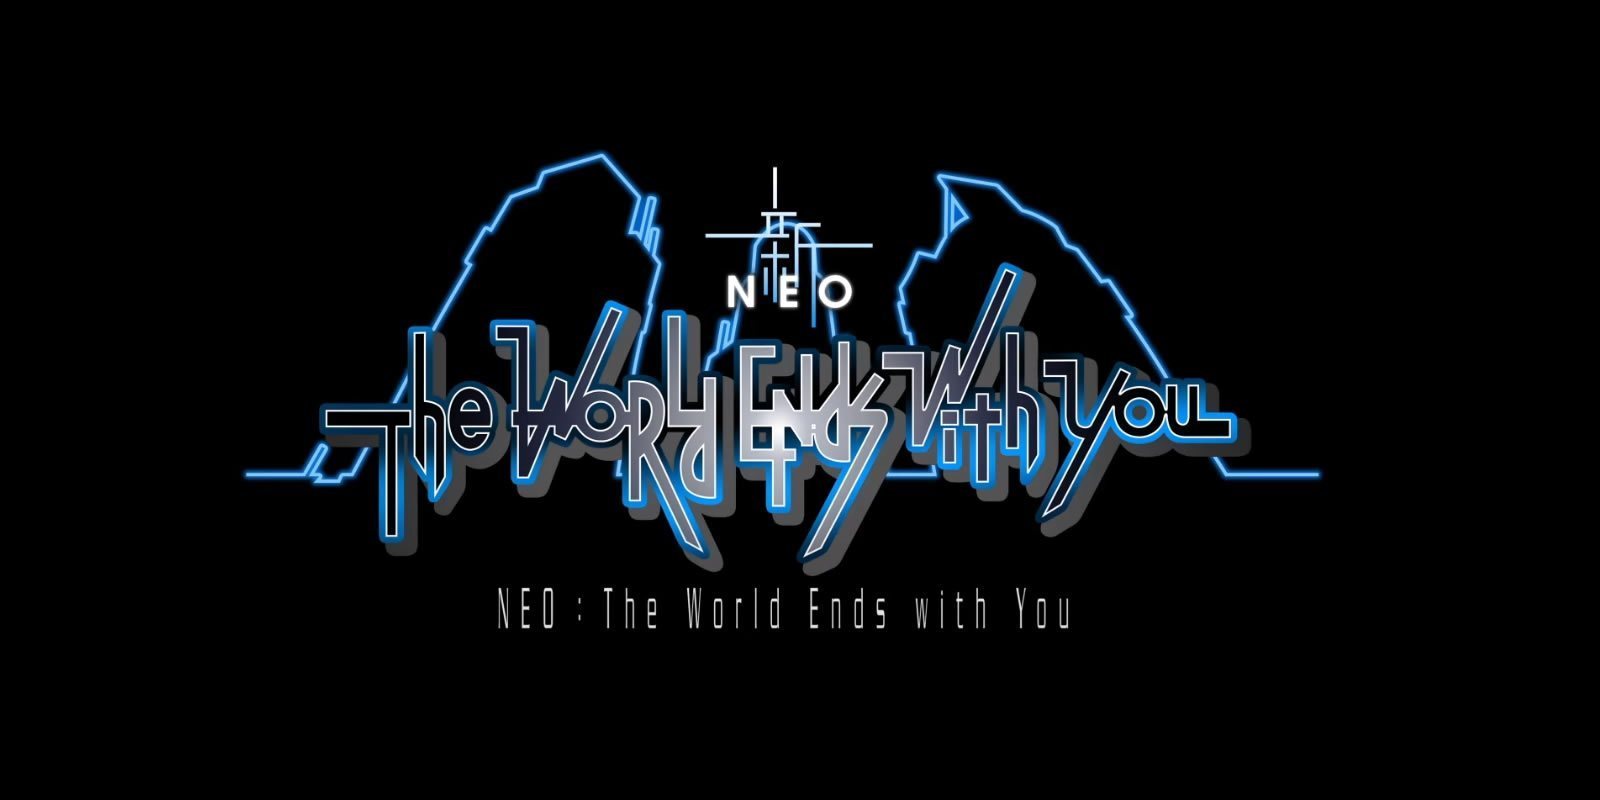 Se anuncia 'NEO The World Ends With You' para PS4 y Nintendo Switch